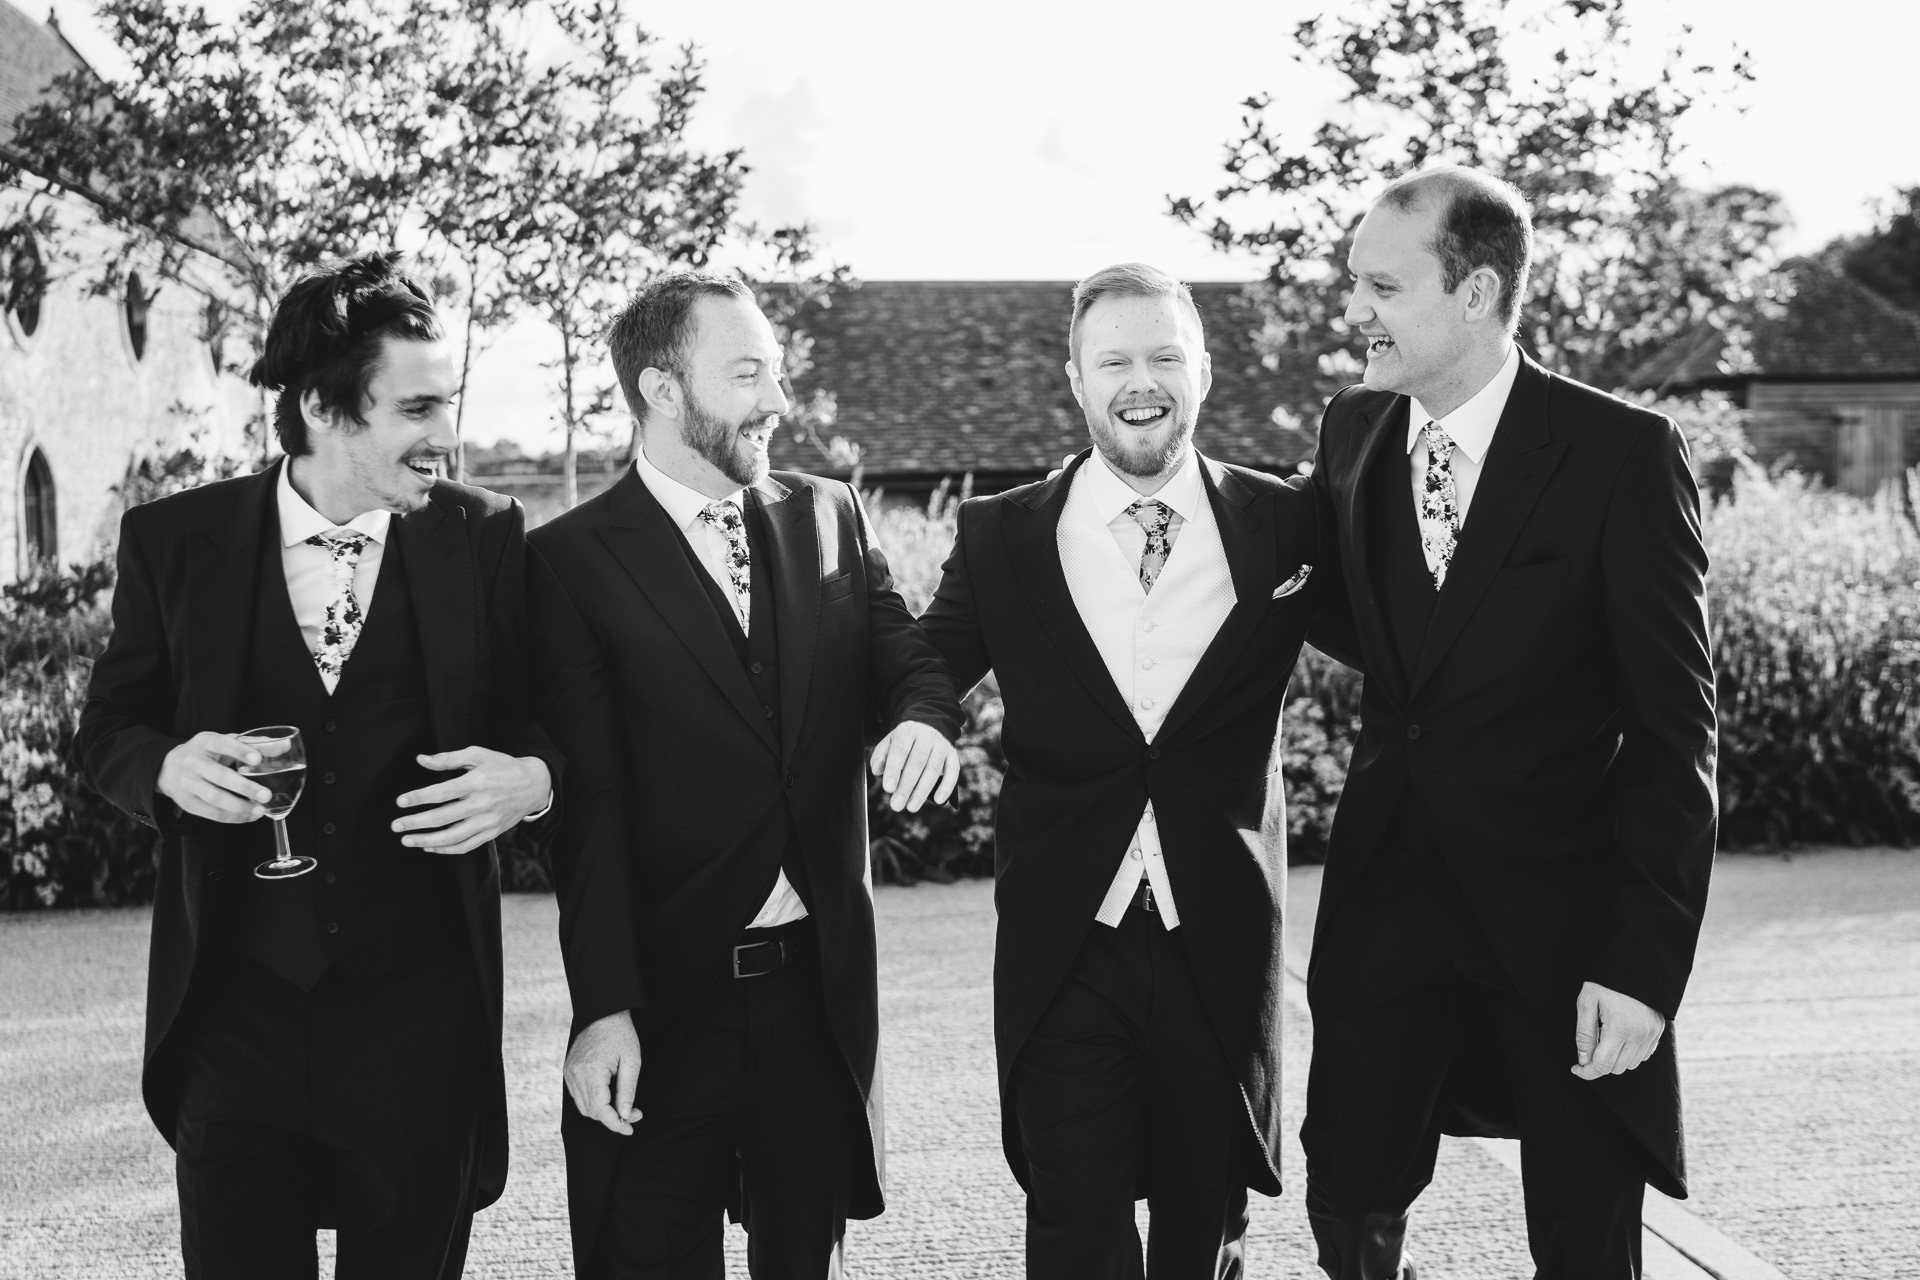 Groom with groomsmen laughing together